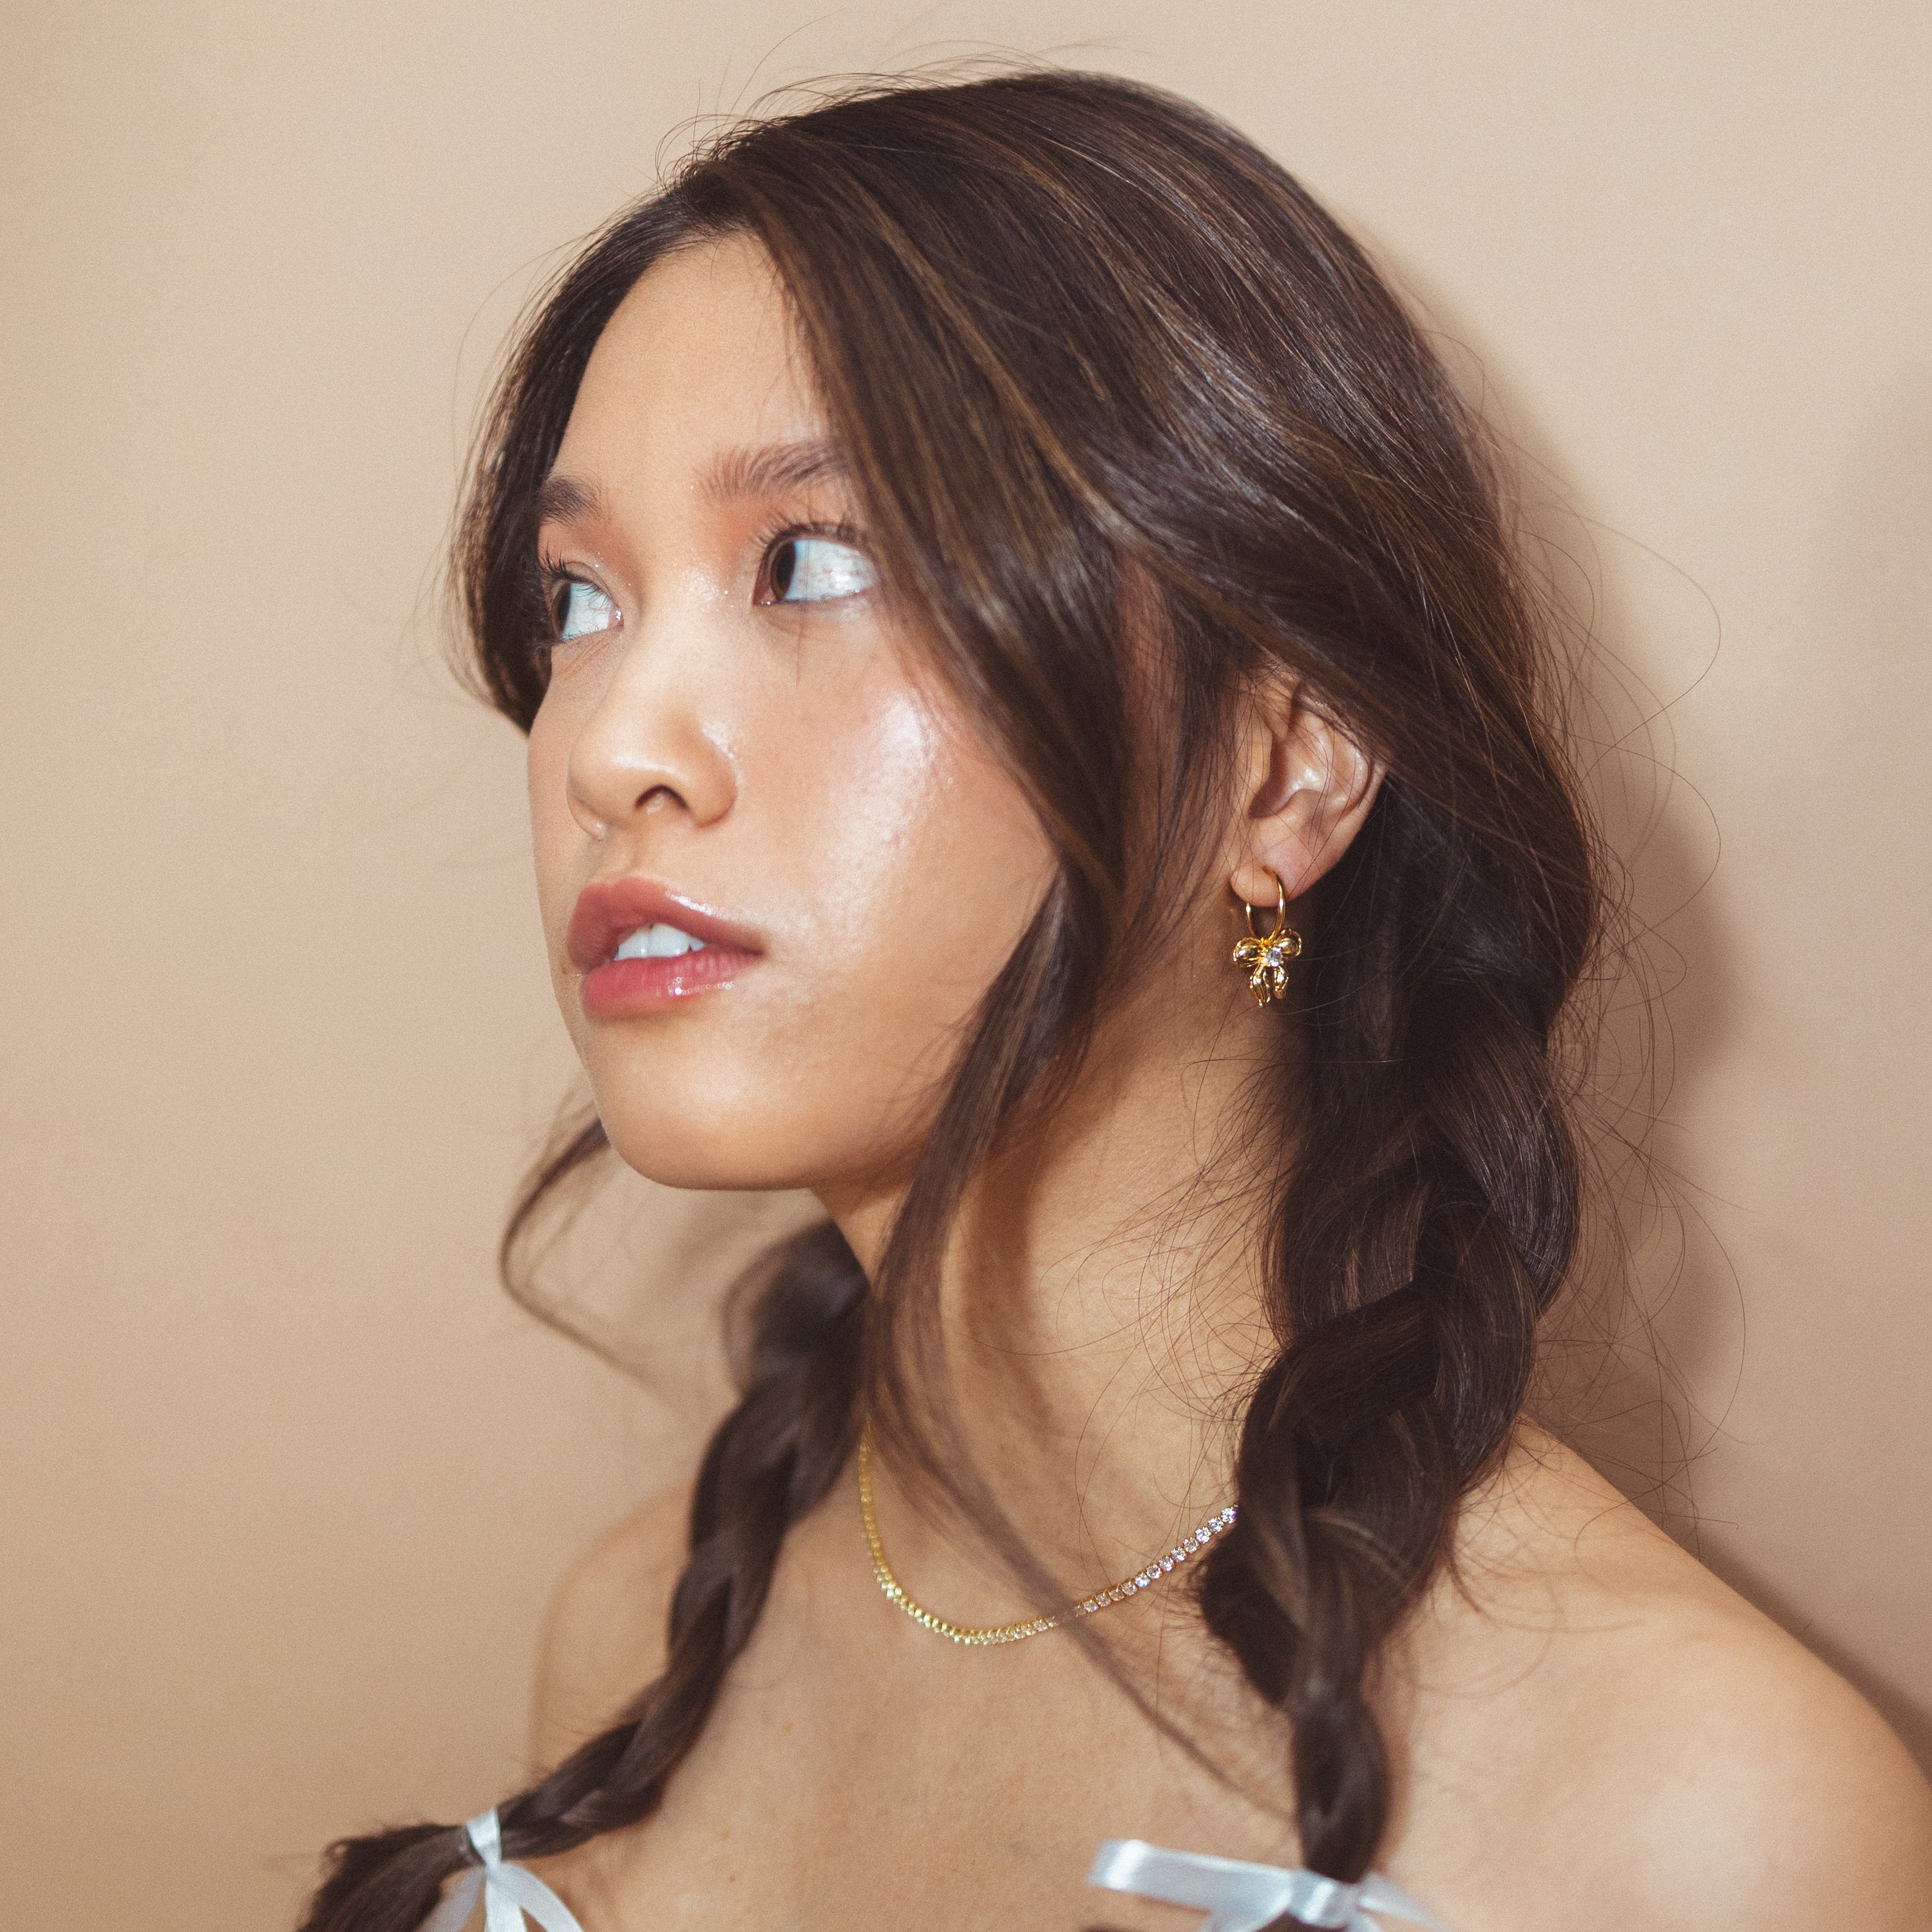 A model wearing the Ares Clip On Earrings. The sliding spring closure allows for easy adjustment to fit any ear thickness, while the gold tone copper alloy provides a secure hold. Perfect for stretched/healing ears or small/thin earlobes.